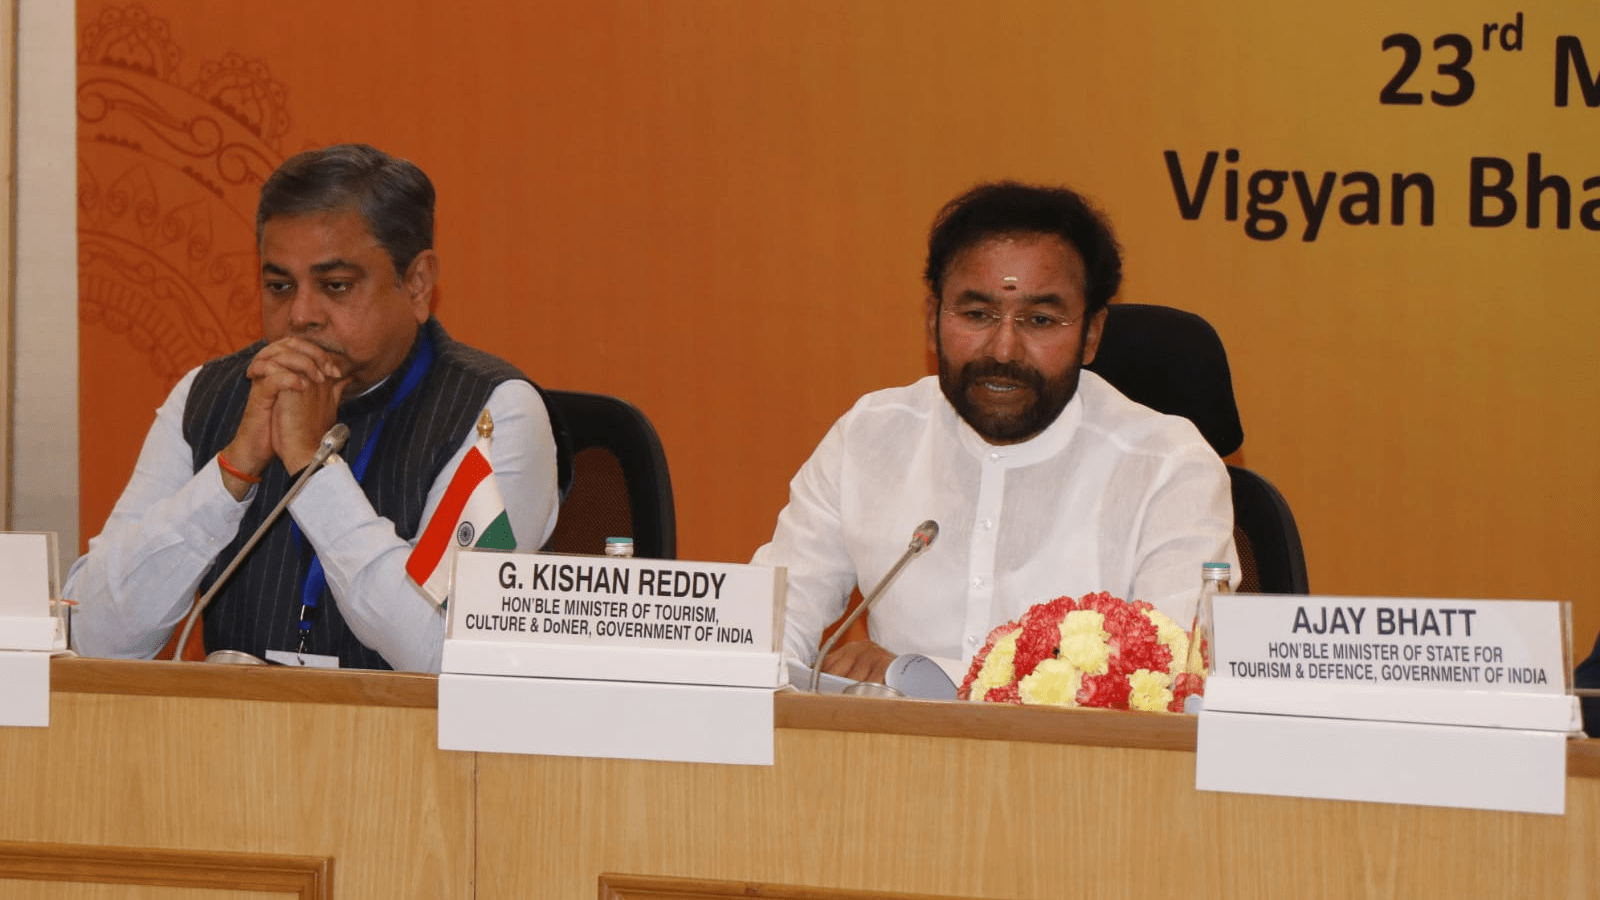 In a statement, the ministry said, “A Roundtable Interaction with Heads of Missions was chaired by G Kishan Reddy,  Minister of Tourism, Culture and DONER.”